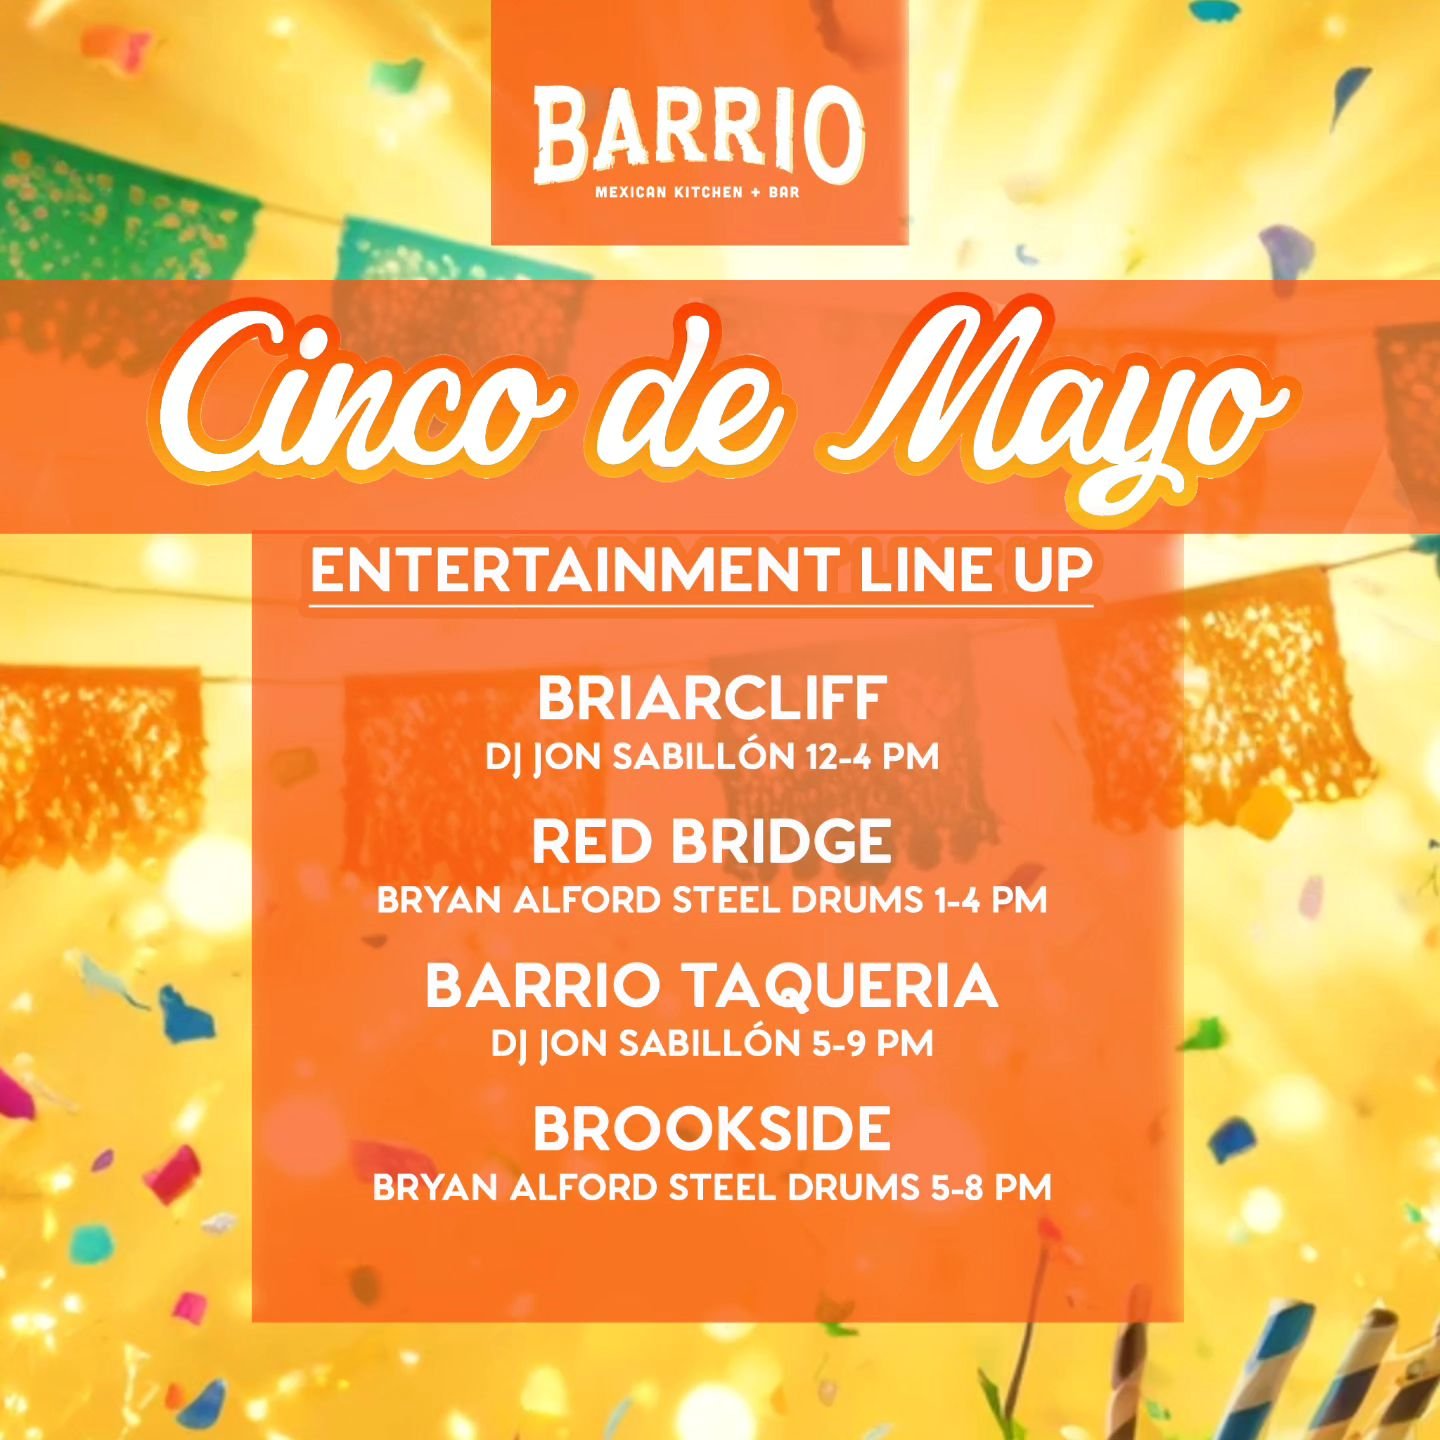 Only 5 DAYS until our Cinco de Mayo fiesta!&nbsp;🪅🥳🎉

Check out the entertainment line up!